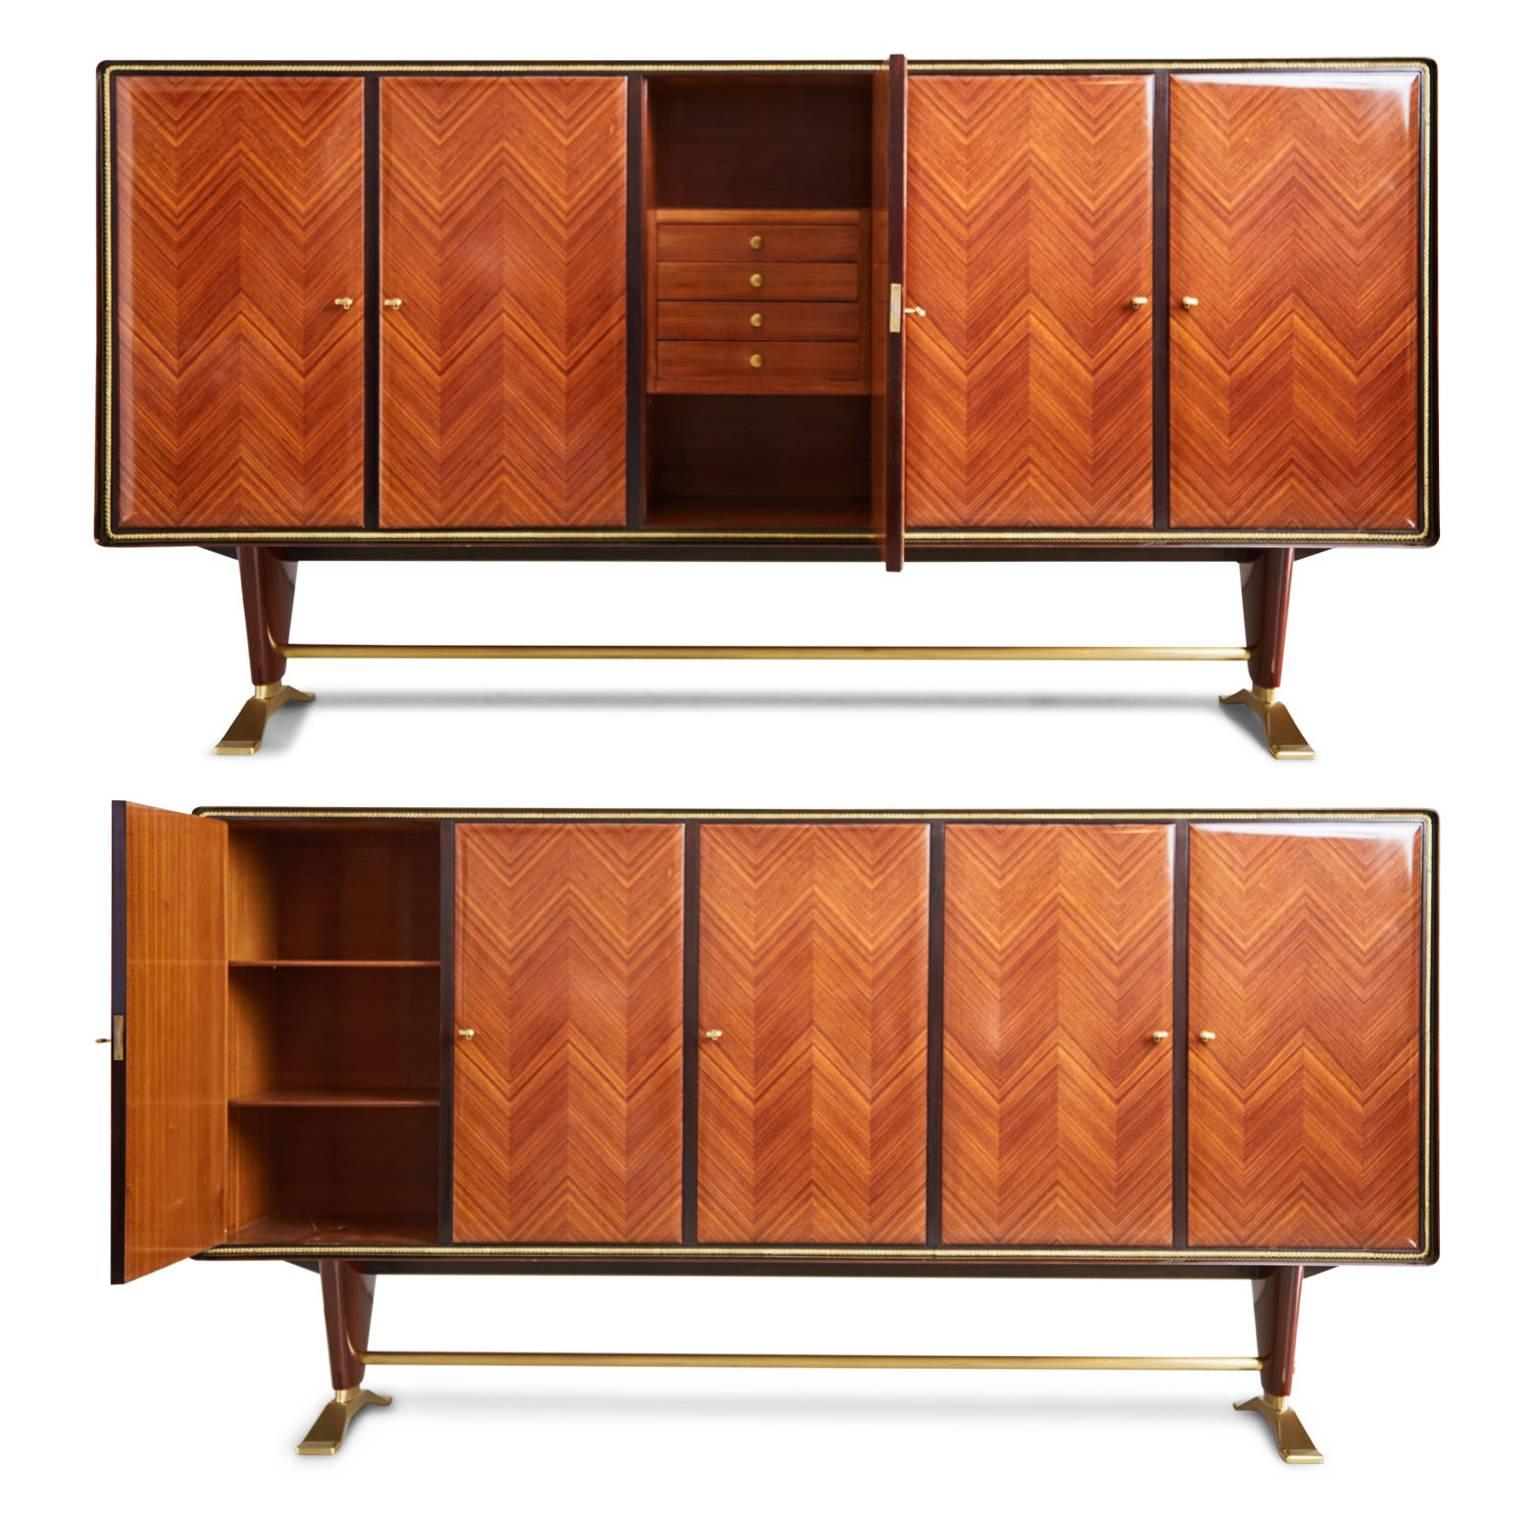 Magnificent Paolo Buffa, attributed, art deco buffet cabinet featuring Italian rosewood parquetry in a chevron pattern with a beautiful french polish and impressive bronze accents with lockable doors complete with five (5) keys. The interior is